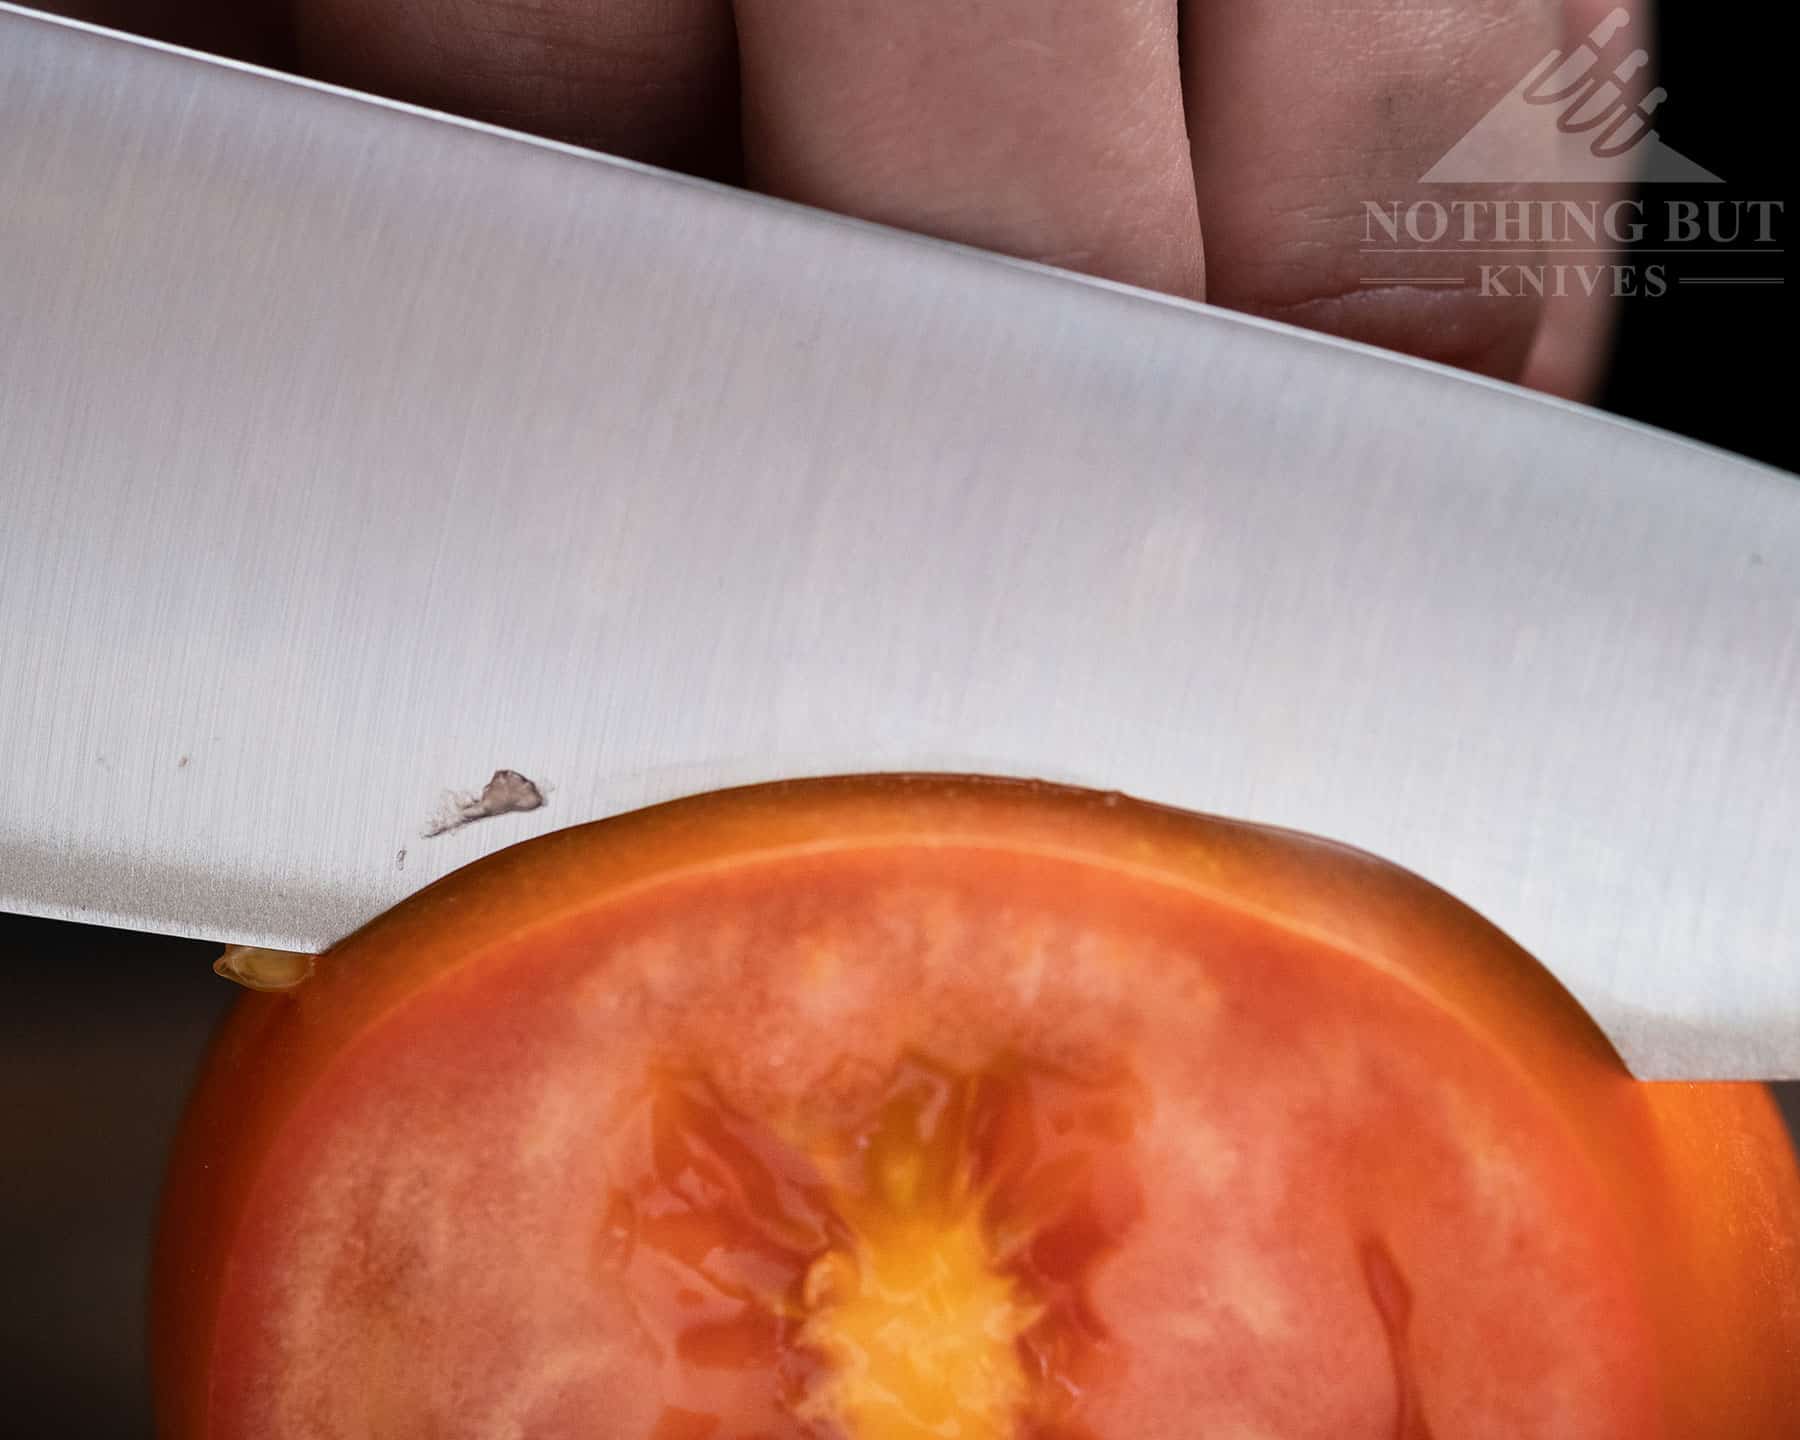 A close-up image of the Global G2 chef knife slicing through a tomato.